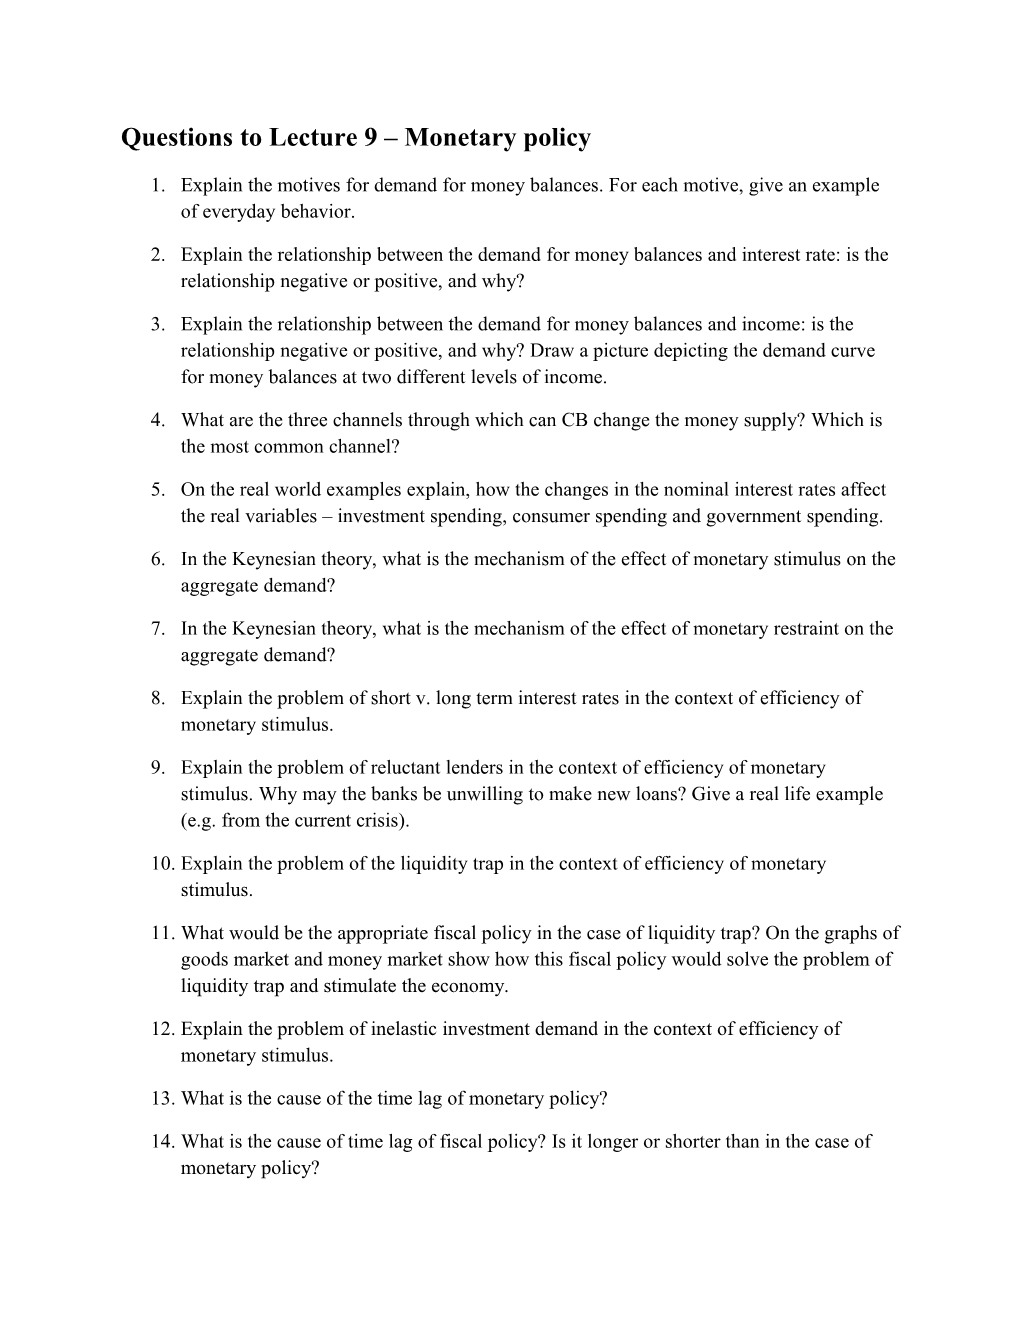 Questions to Lecture 9 Monetary Policy